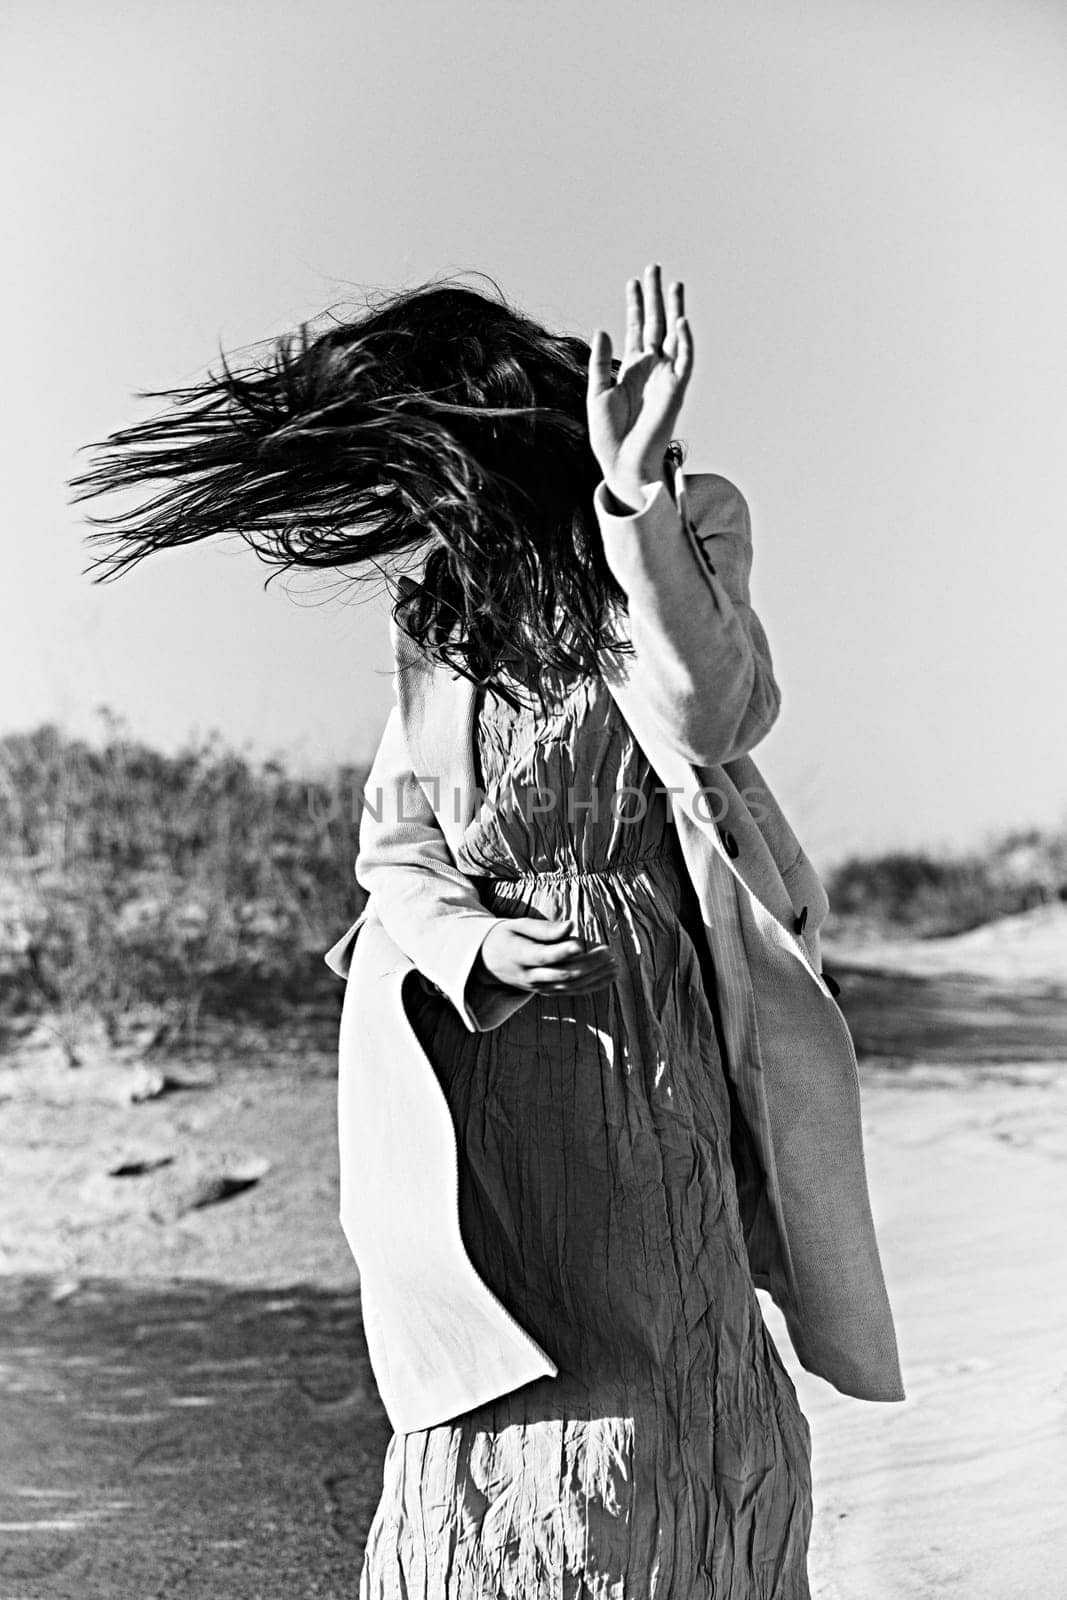 monochrome photograph of a twirling woman on the coast in a light-colored jacket with her face covered by her hair. High quality photo